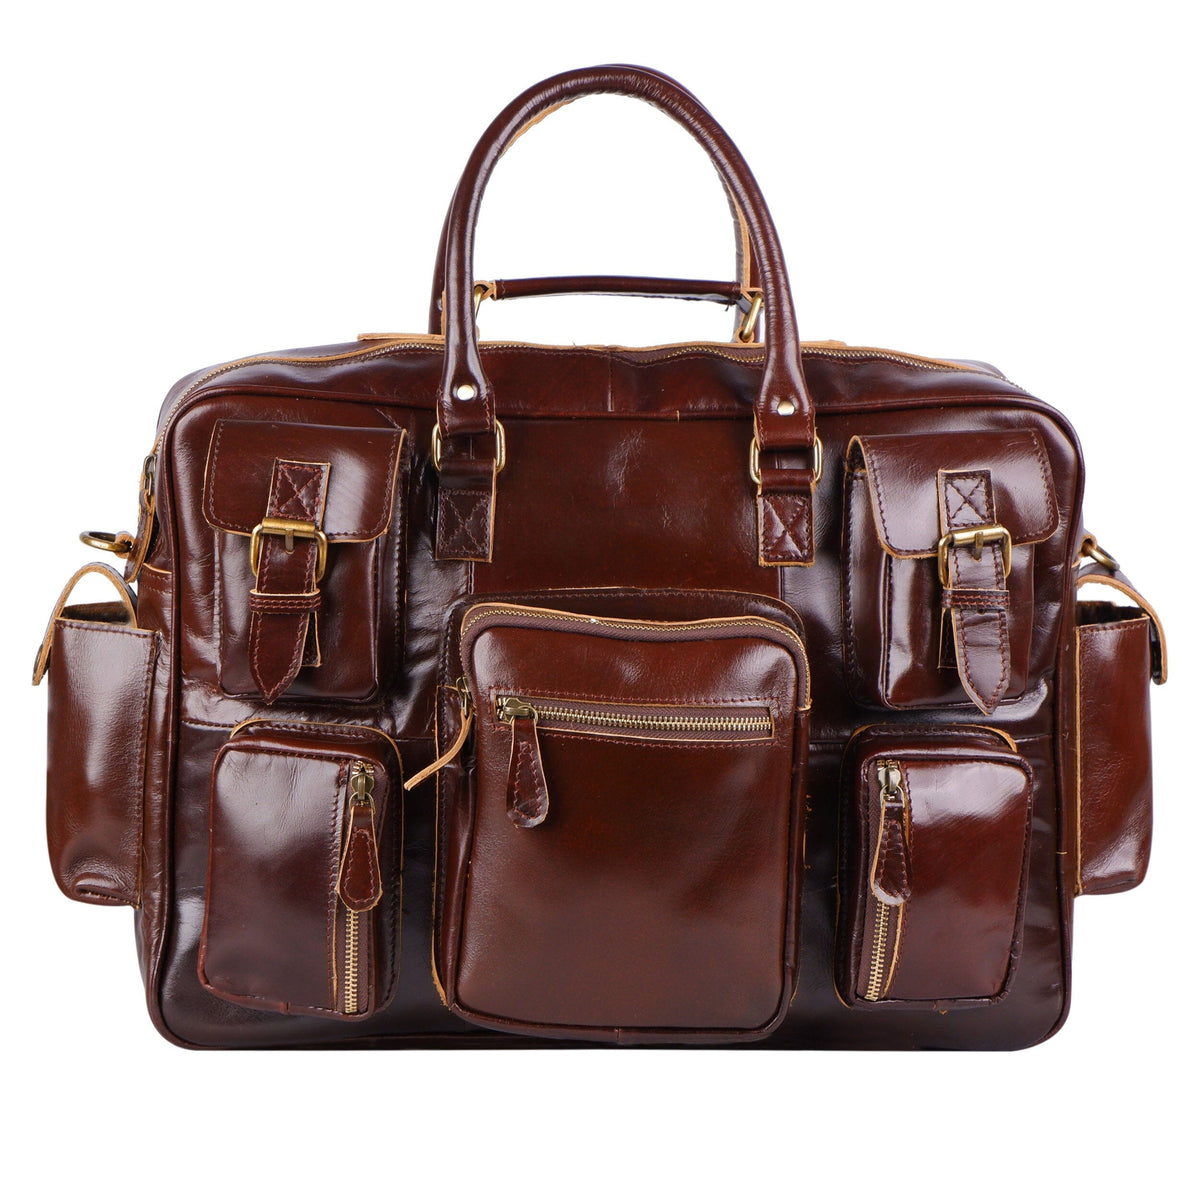 Norman Cherry Red Leather Briefcase | Leather Briefcase For Men ...